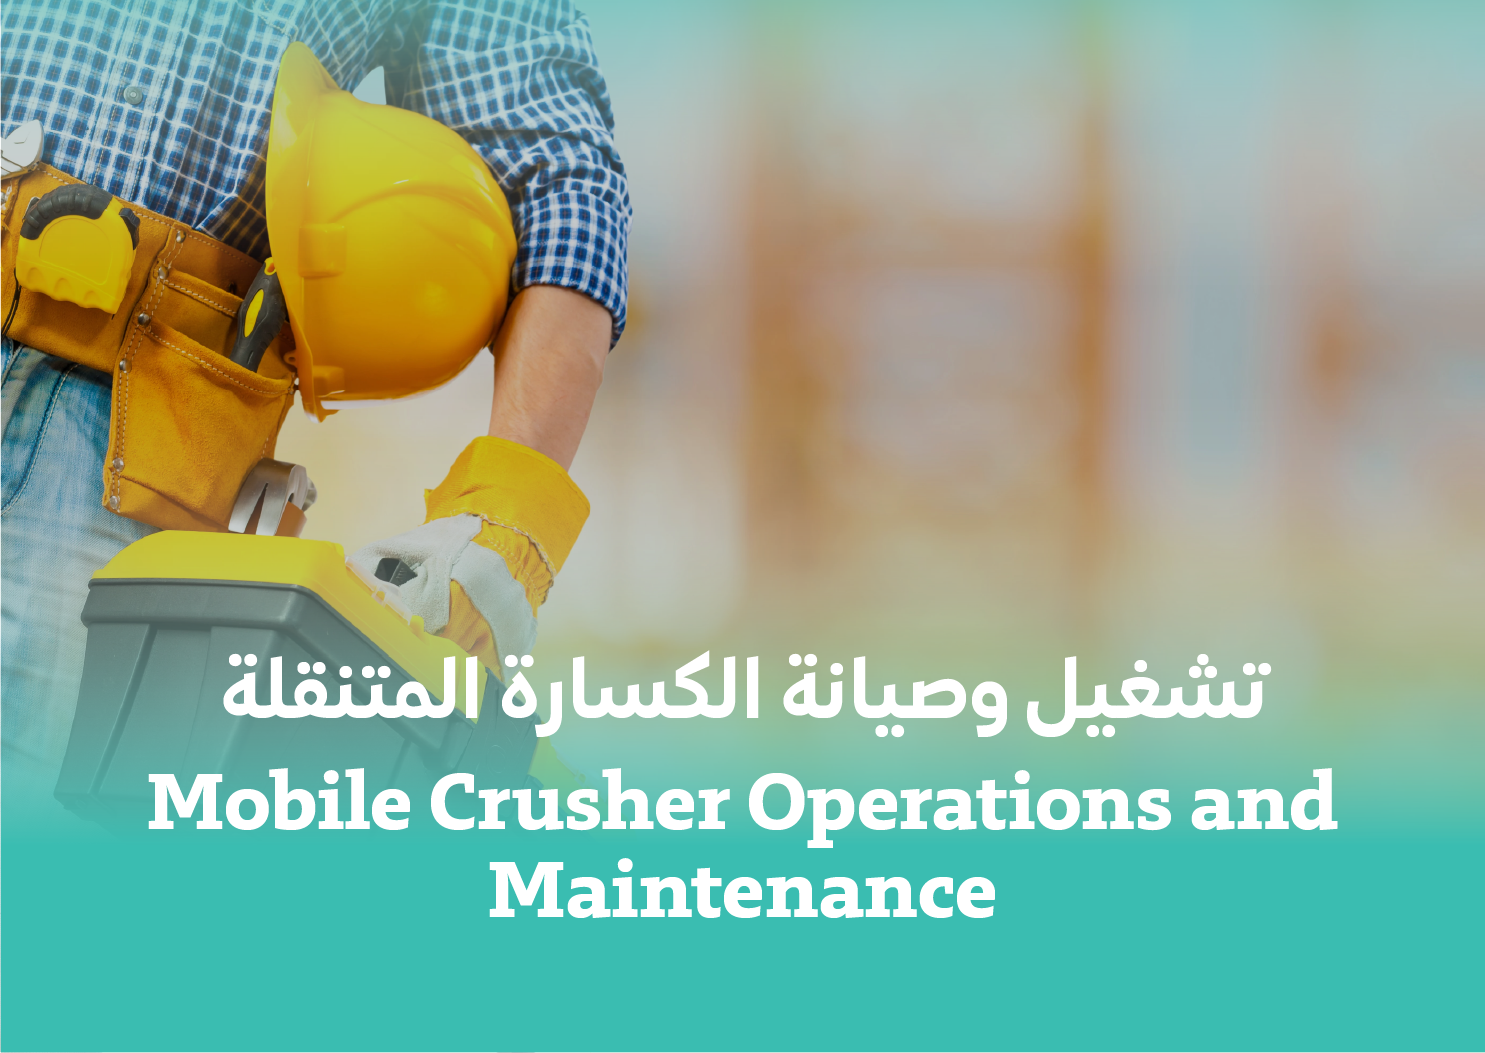 Mobile Crusher Operations and Maintenance